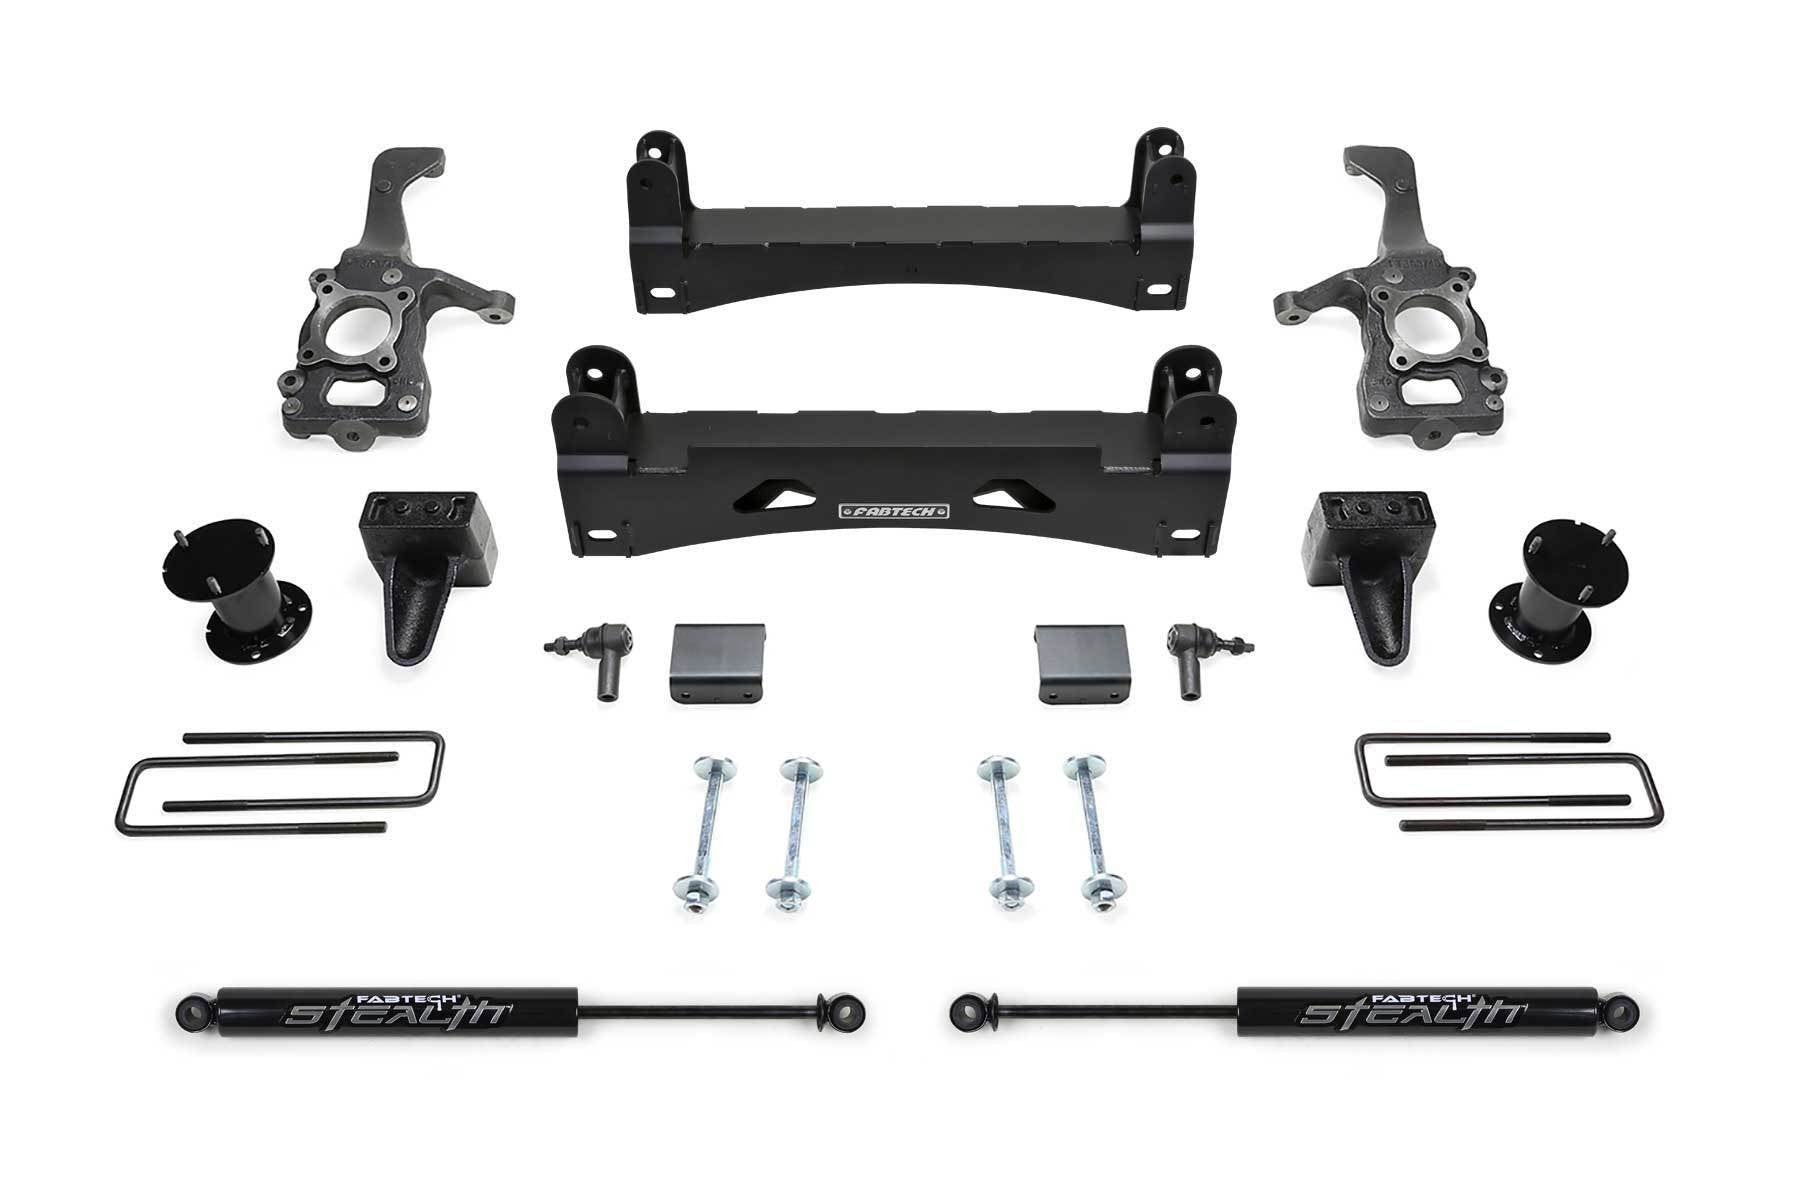 6" BASIC SYS W/ STEALTH 2015-18 FORD F150 2WD - 6" BASIC SYS W/ STEA - Fabtech - Texas Complete Truck Center